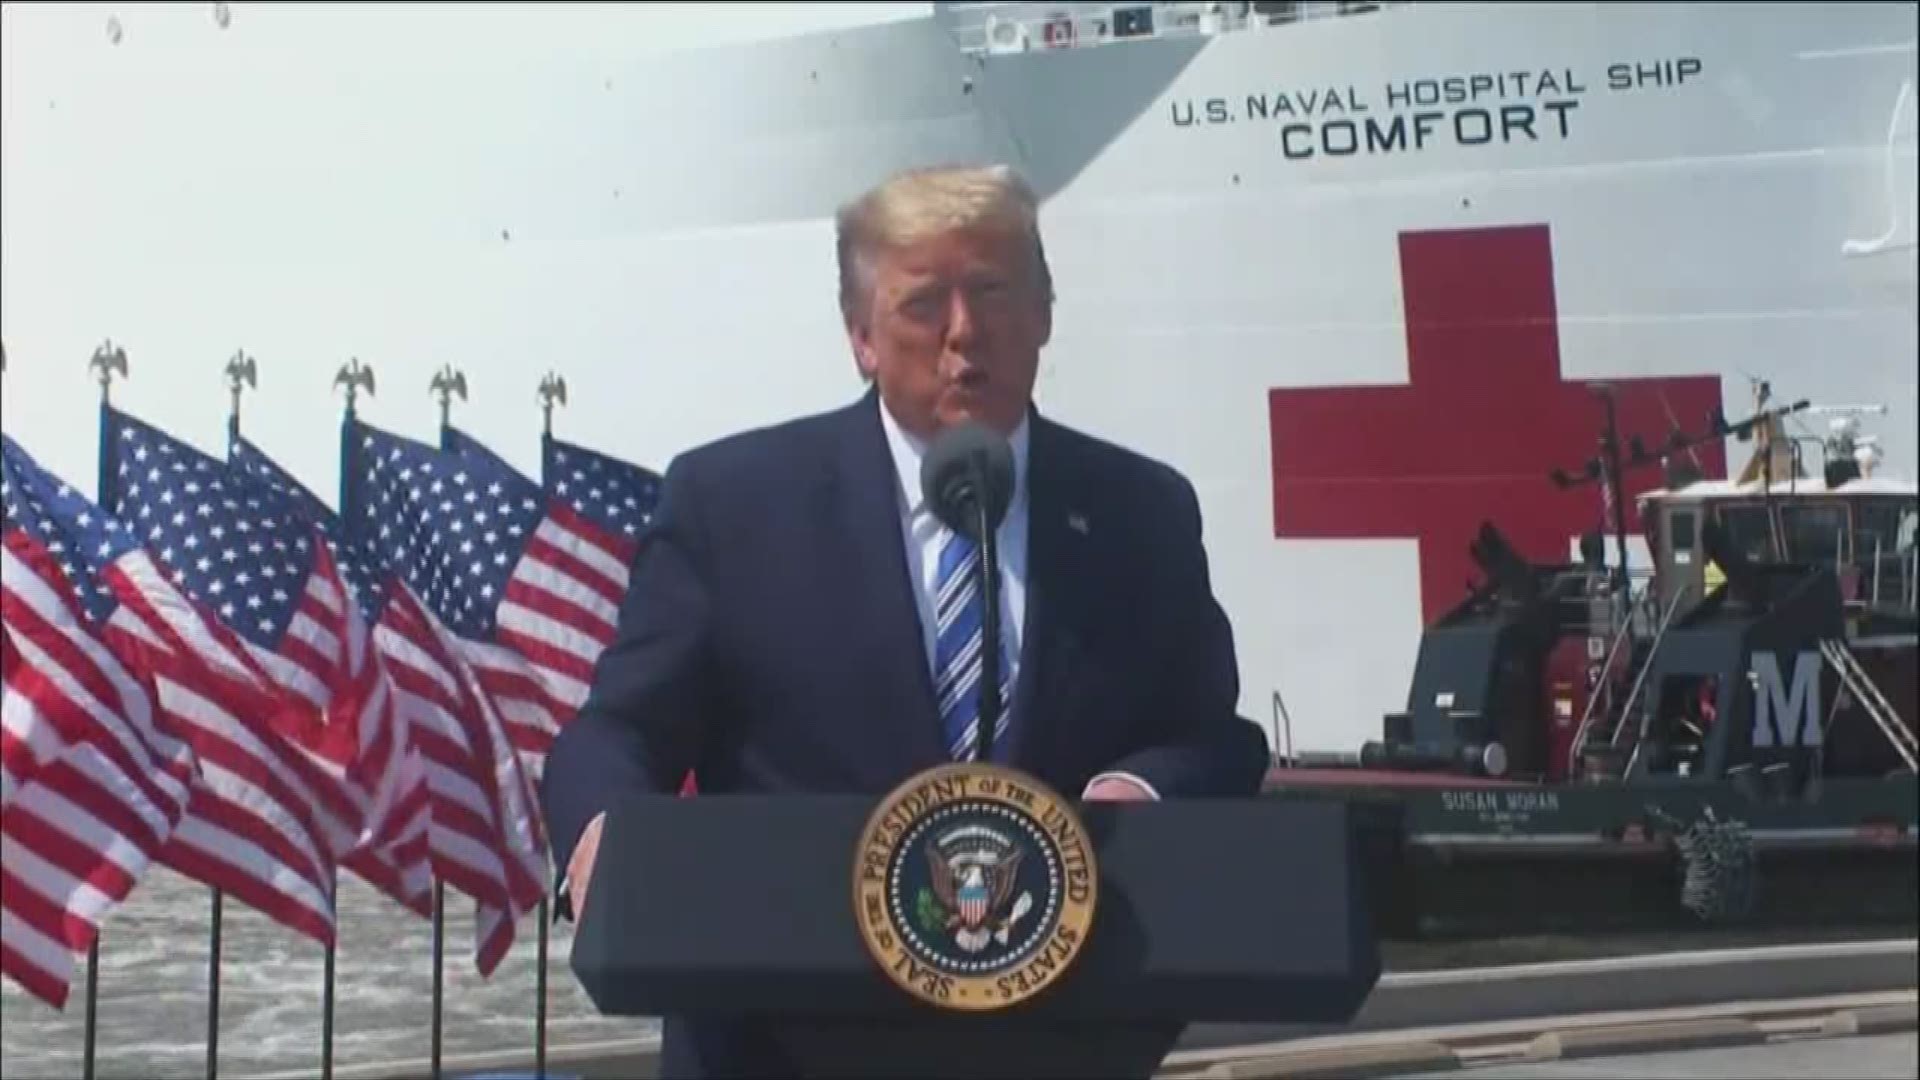 Donald Trump discusses the mission of the USNS Comfort